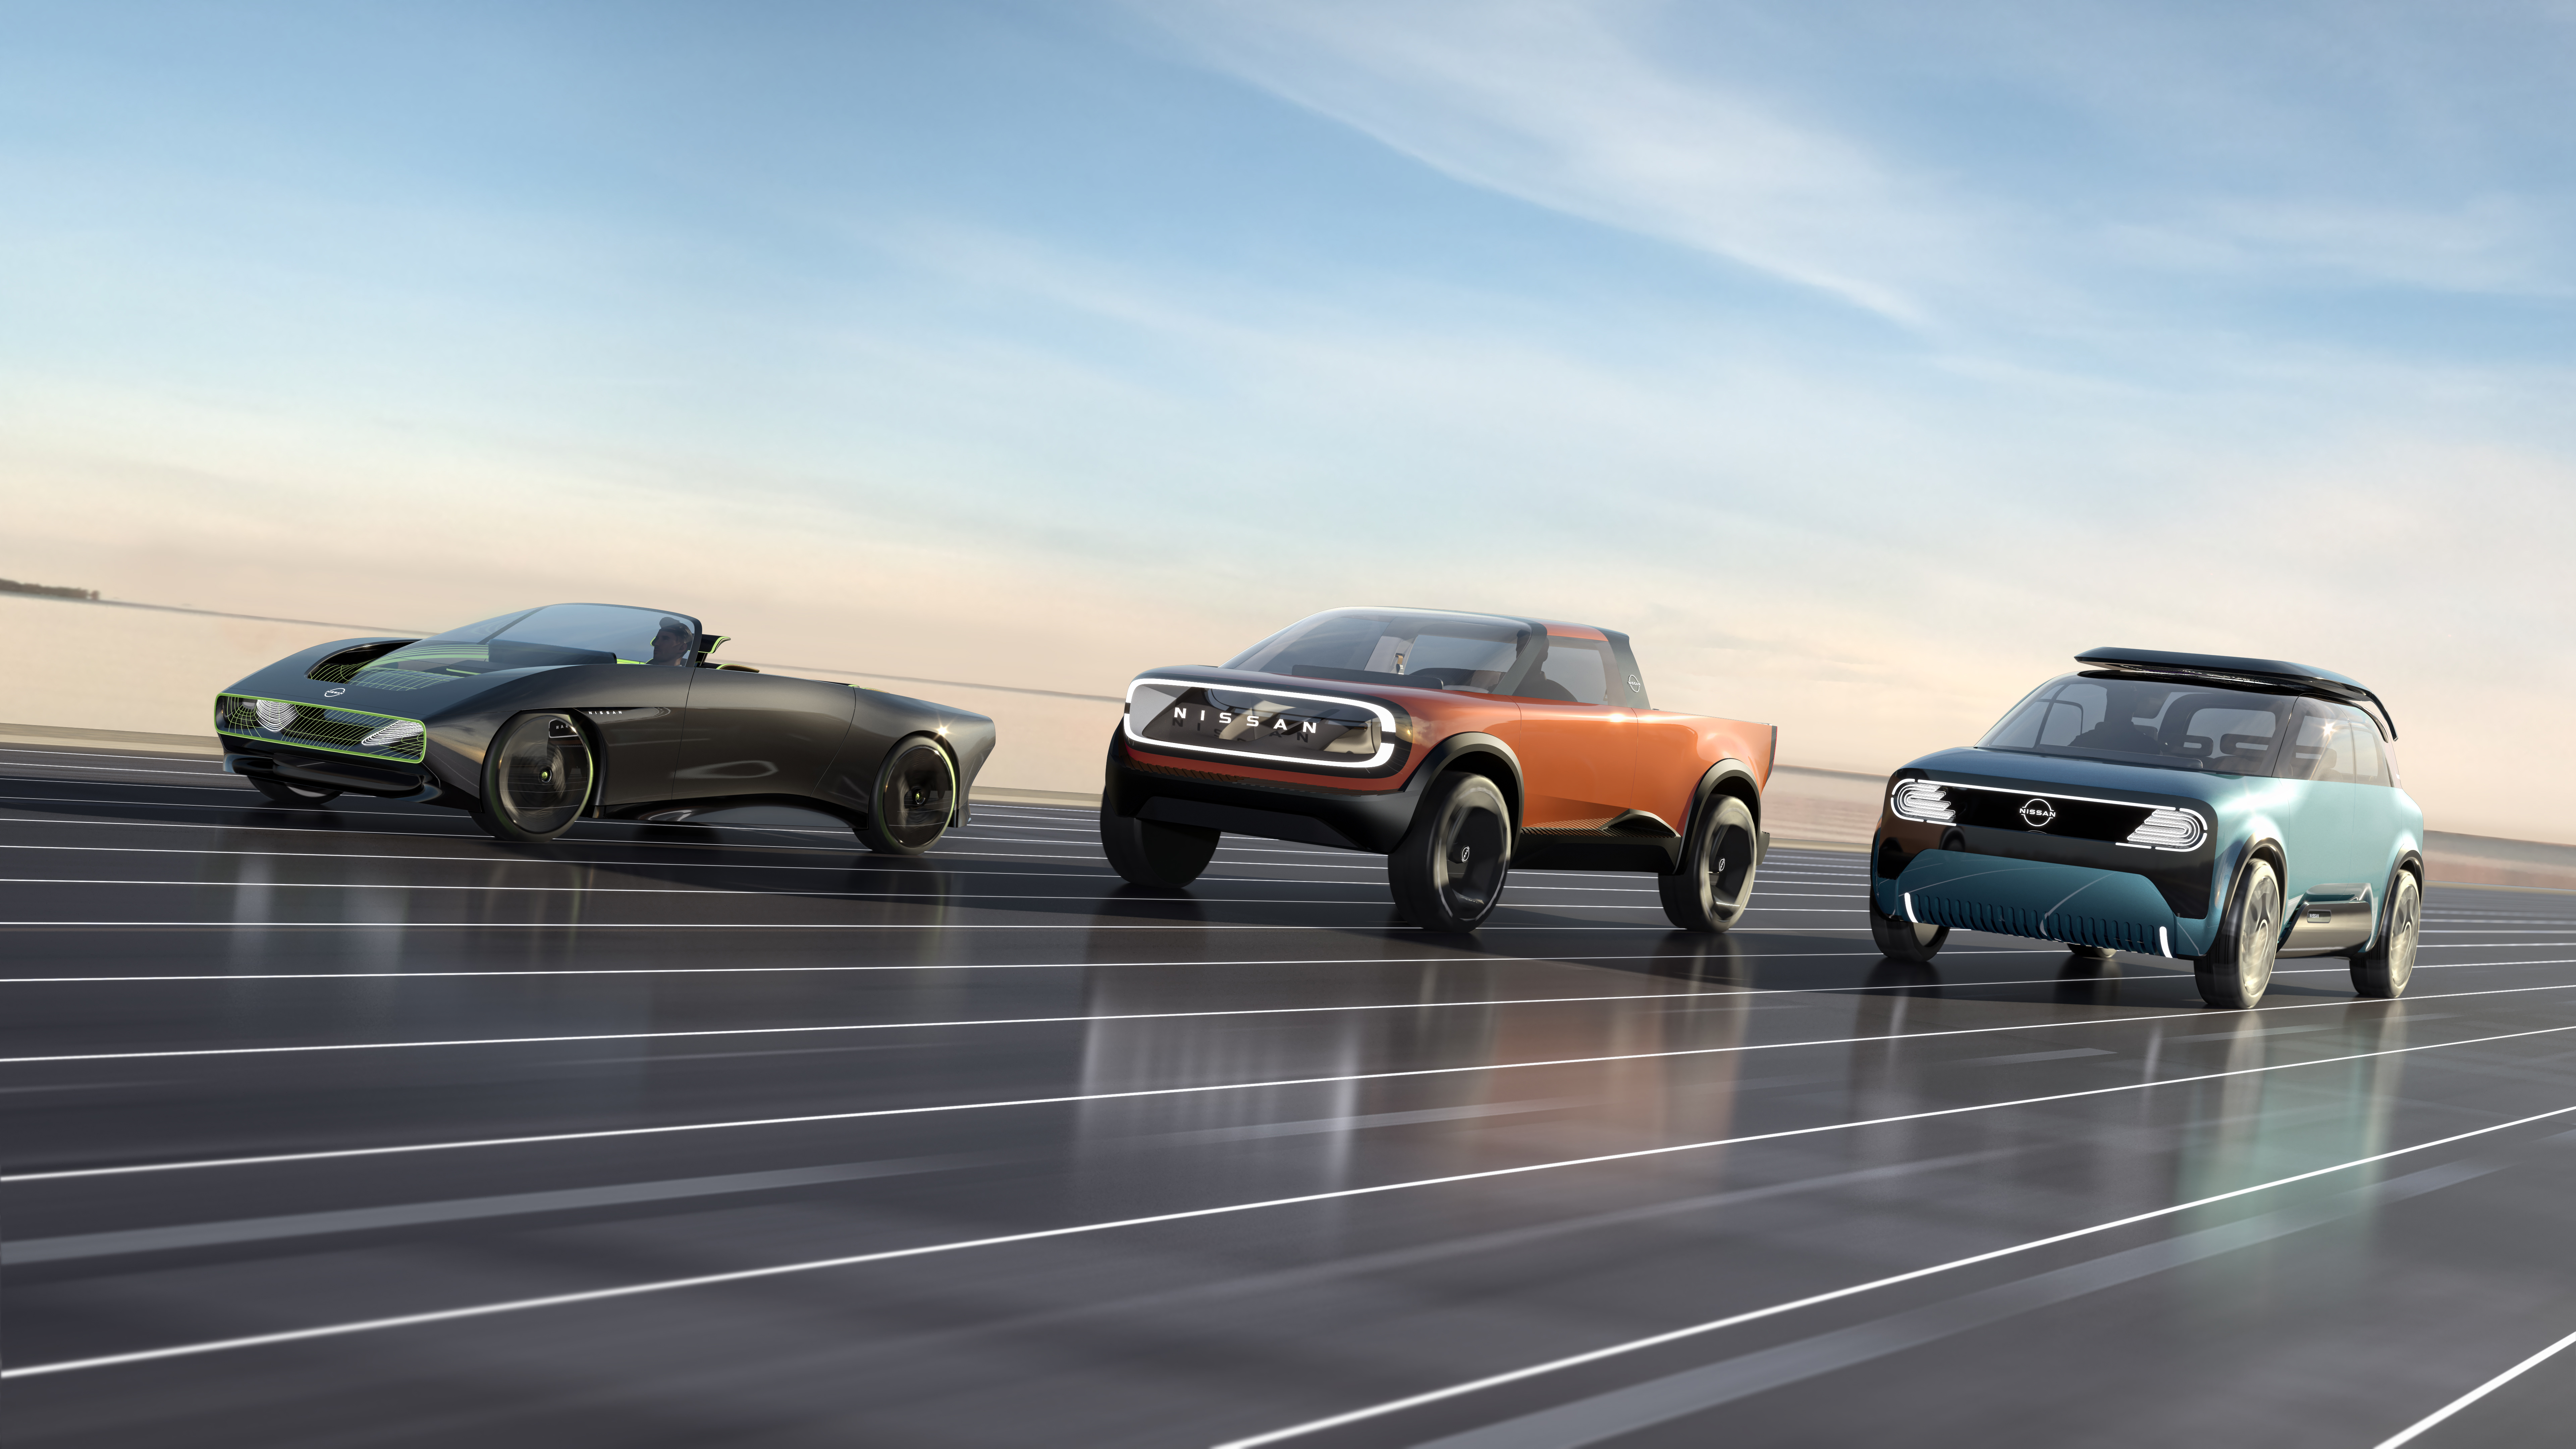 Nissan Outlines Future Electrification Efforts: “Ambition 2030”